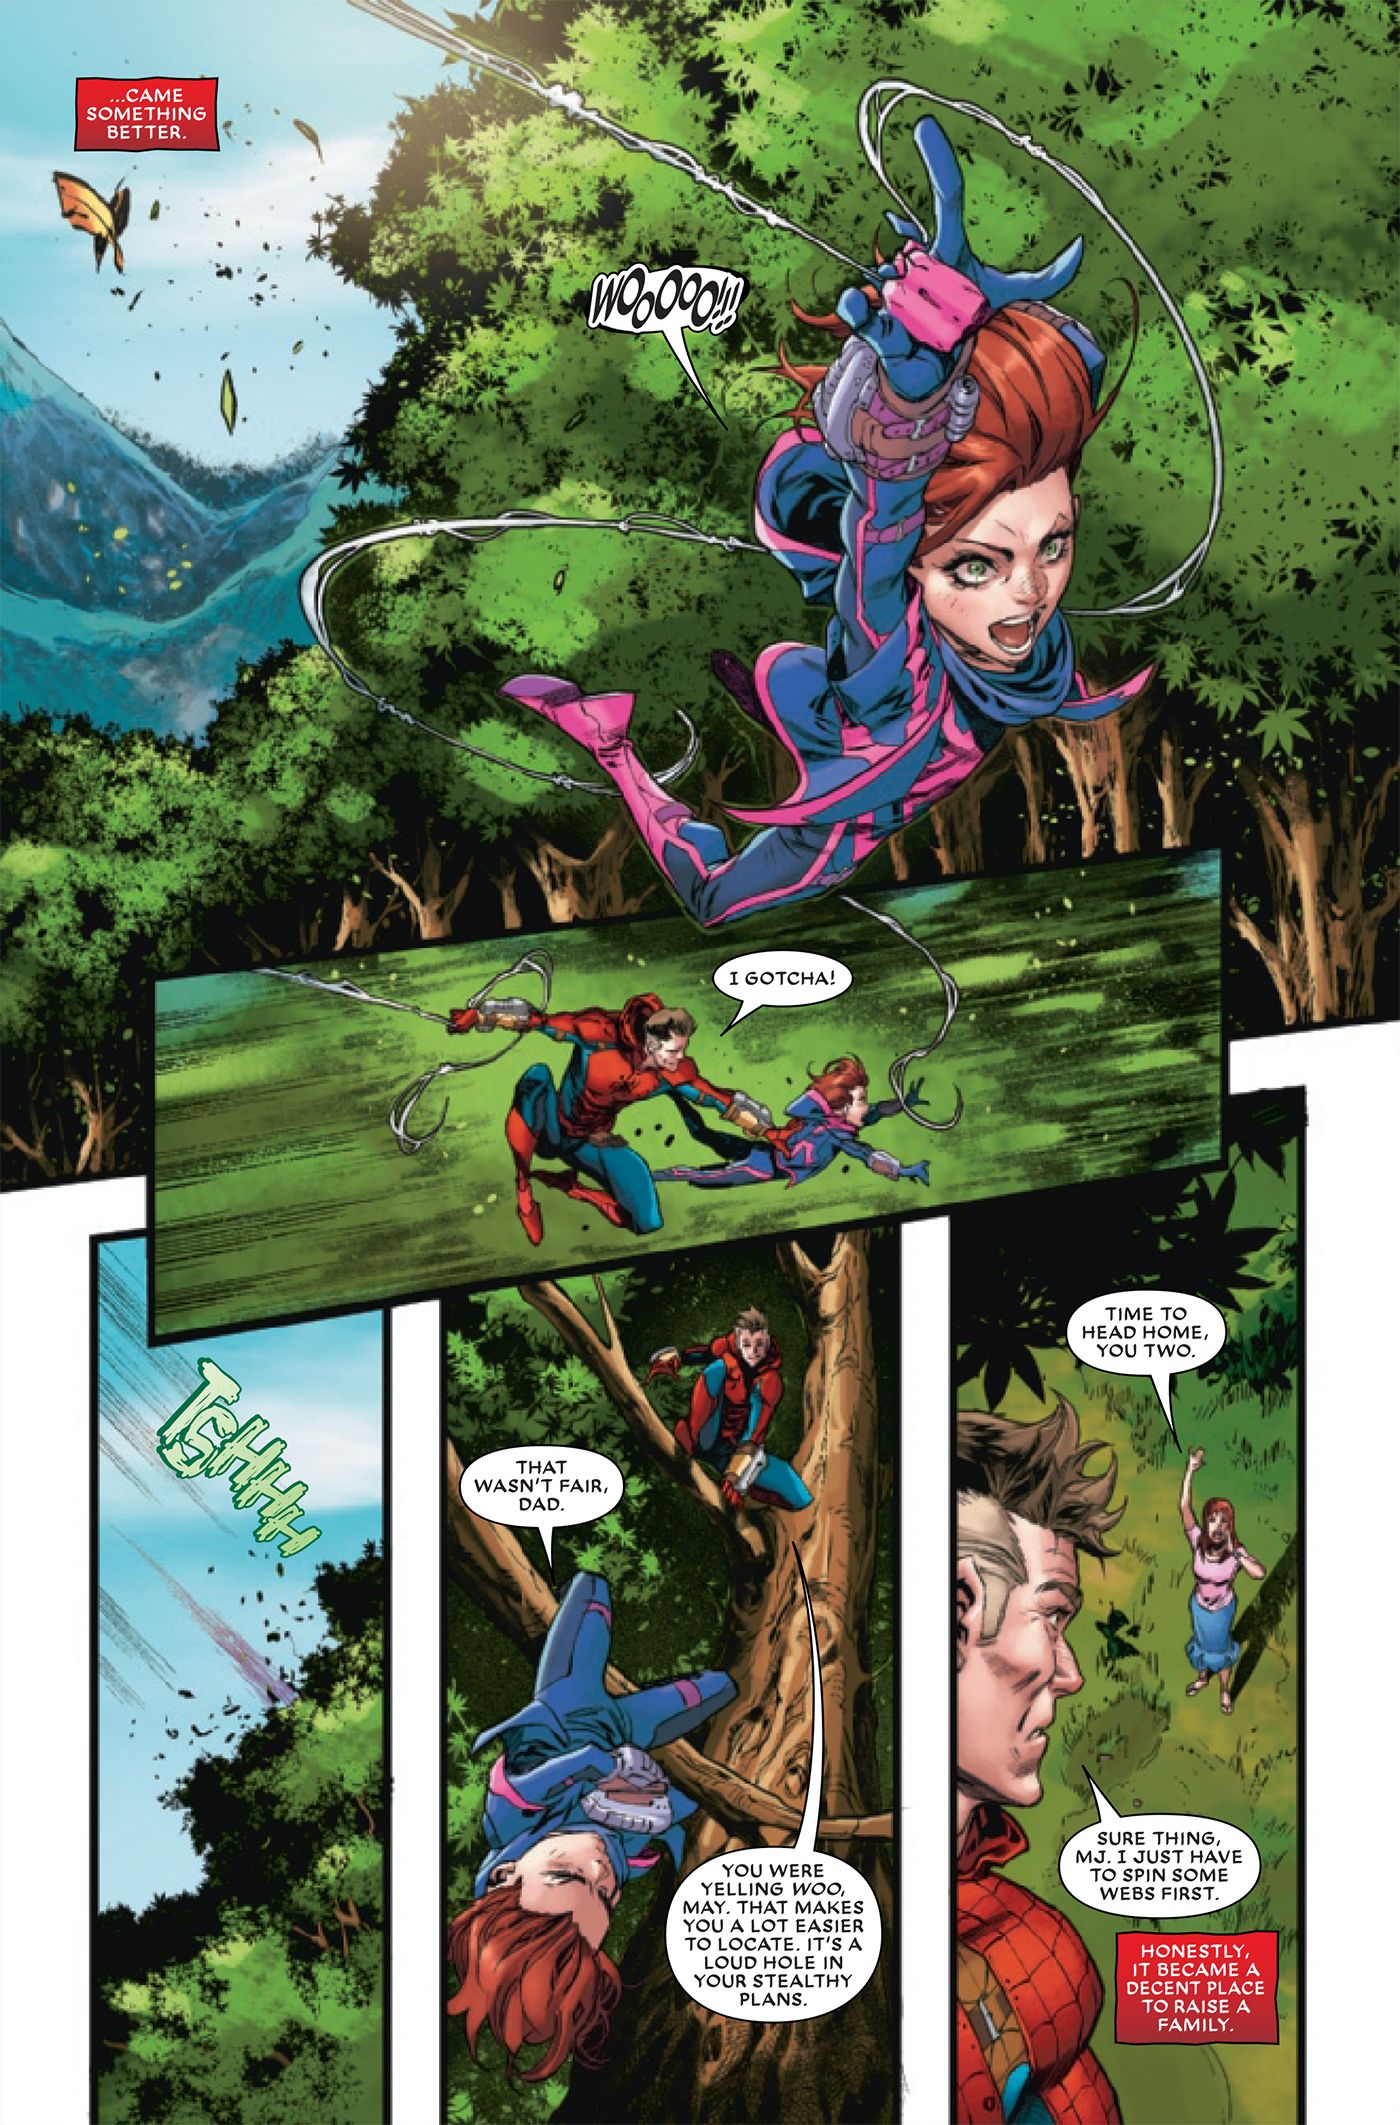 Peter Parker trains his daughter, May, how to swing with webs.